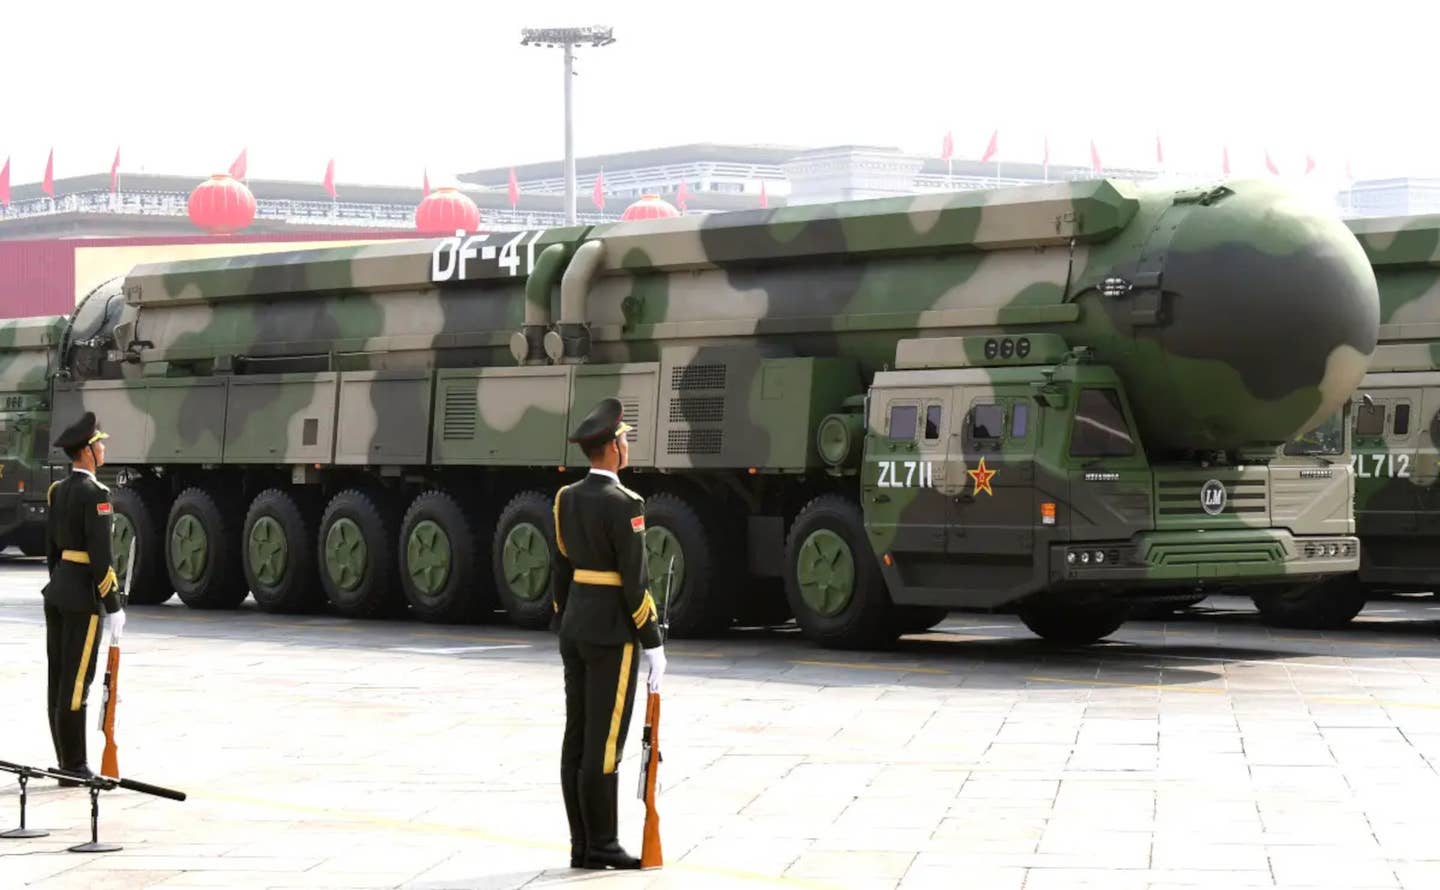 A transporter-erector-launcher for China's DF-41 intercontinental ballistic missile. It's unclear how the NINT researchers envisioned delivering the nuclear warhead in their proposed anti-satellite weapon concept. <em>Kyodo via AP Images</em>